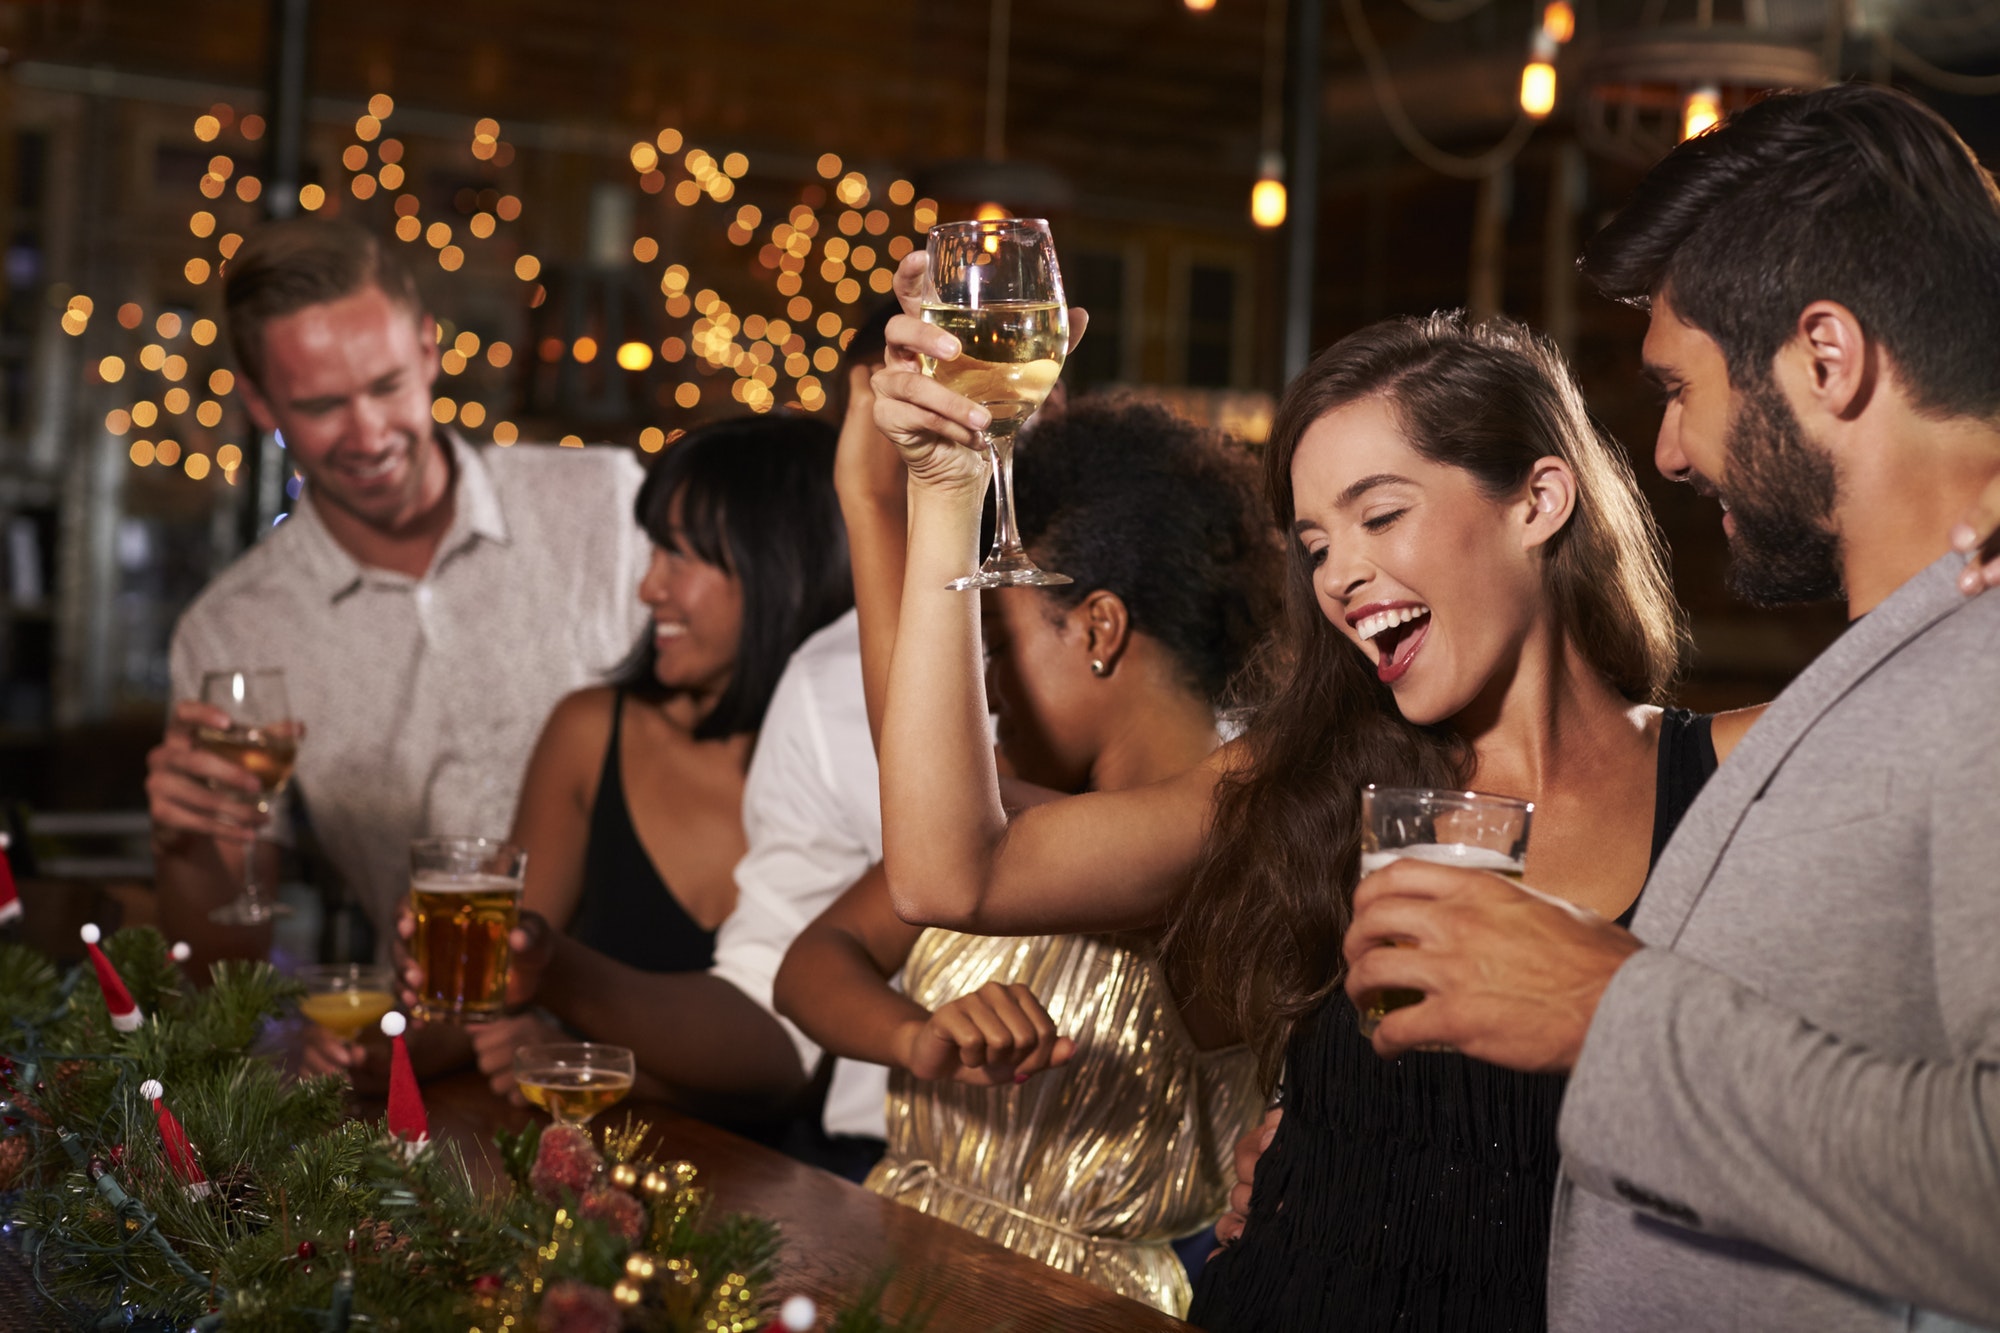 Woman raising a glass at a Christmas party in a bar